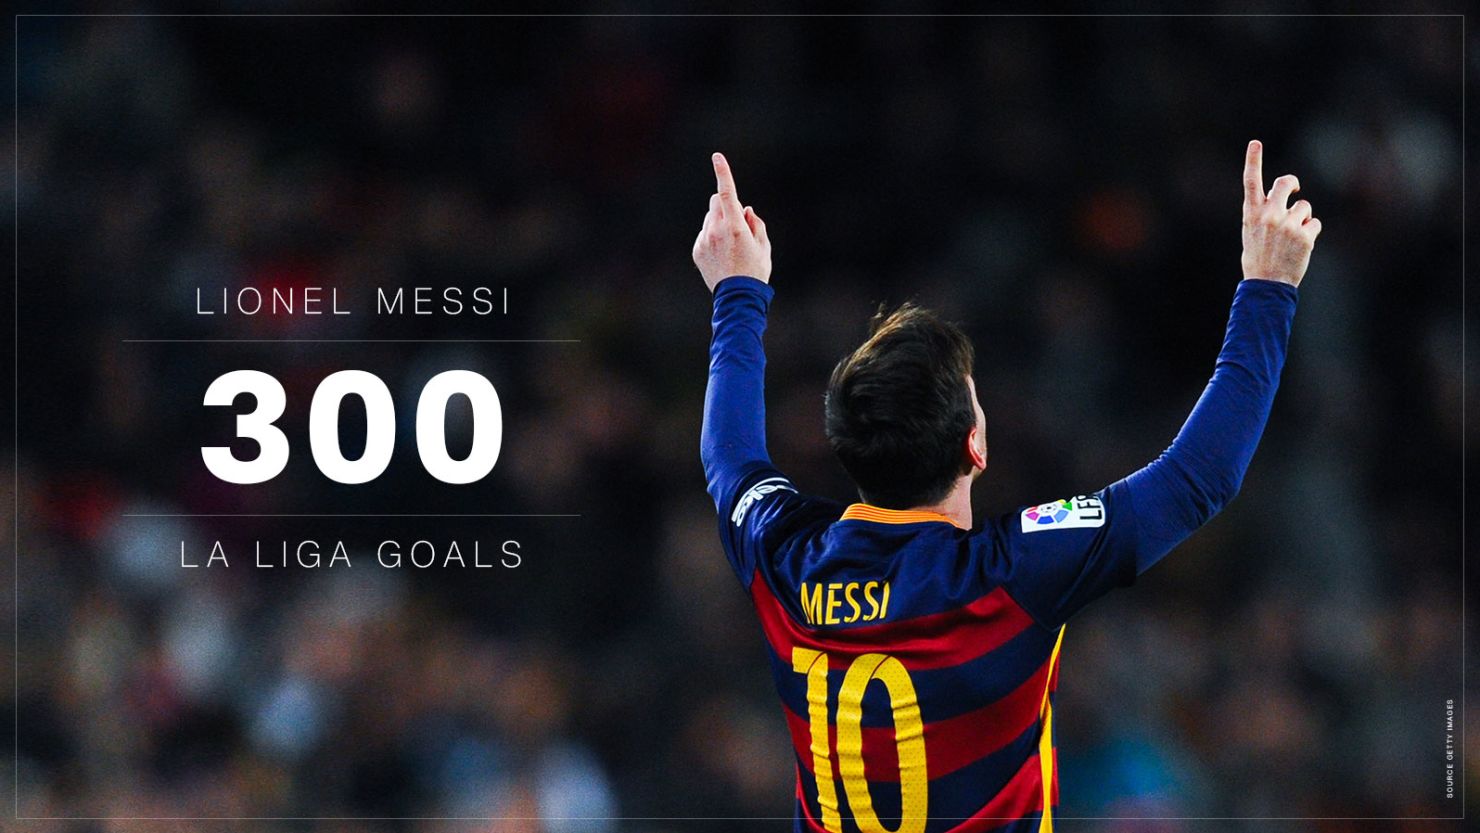 Messi's 300 La Liga goals have come in just 335 league appearances for Barca.